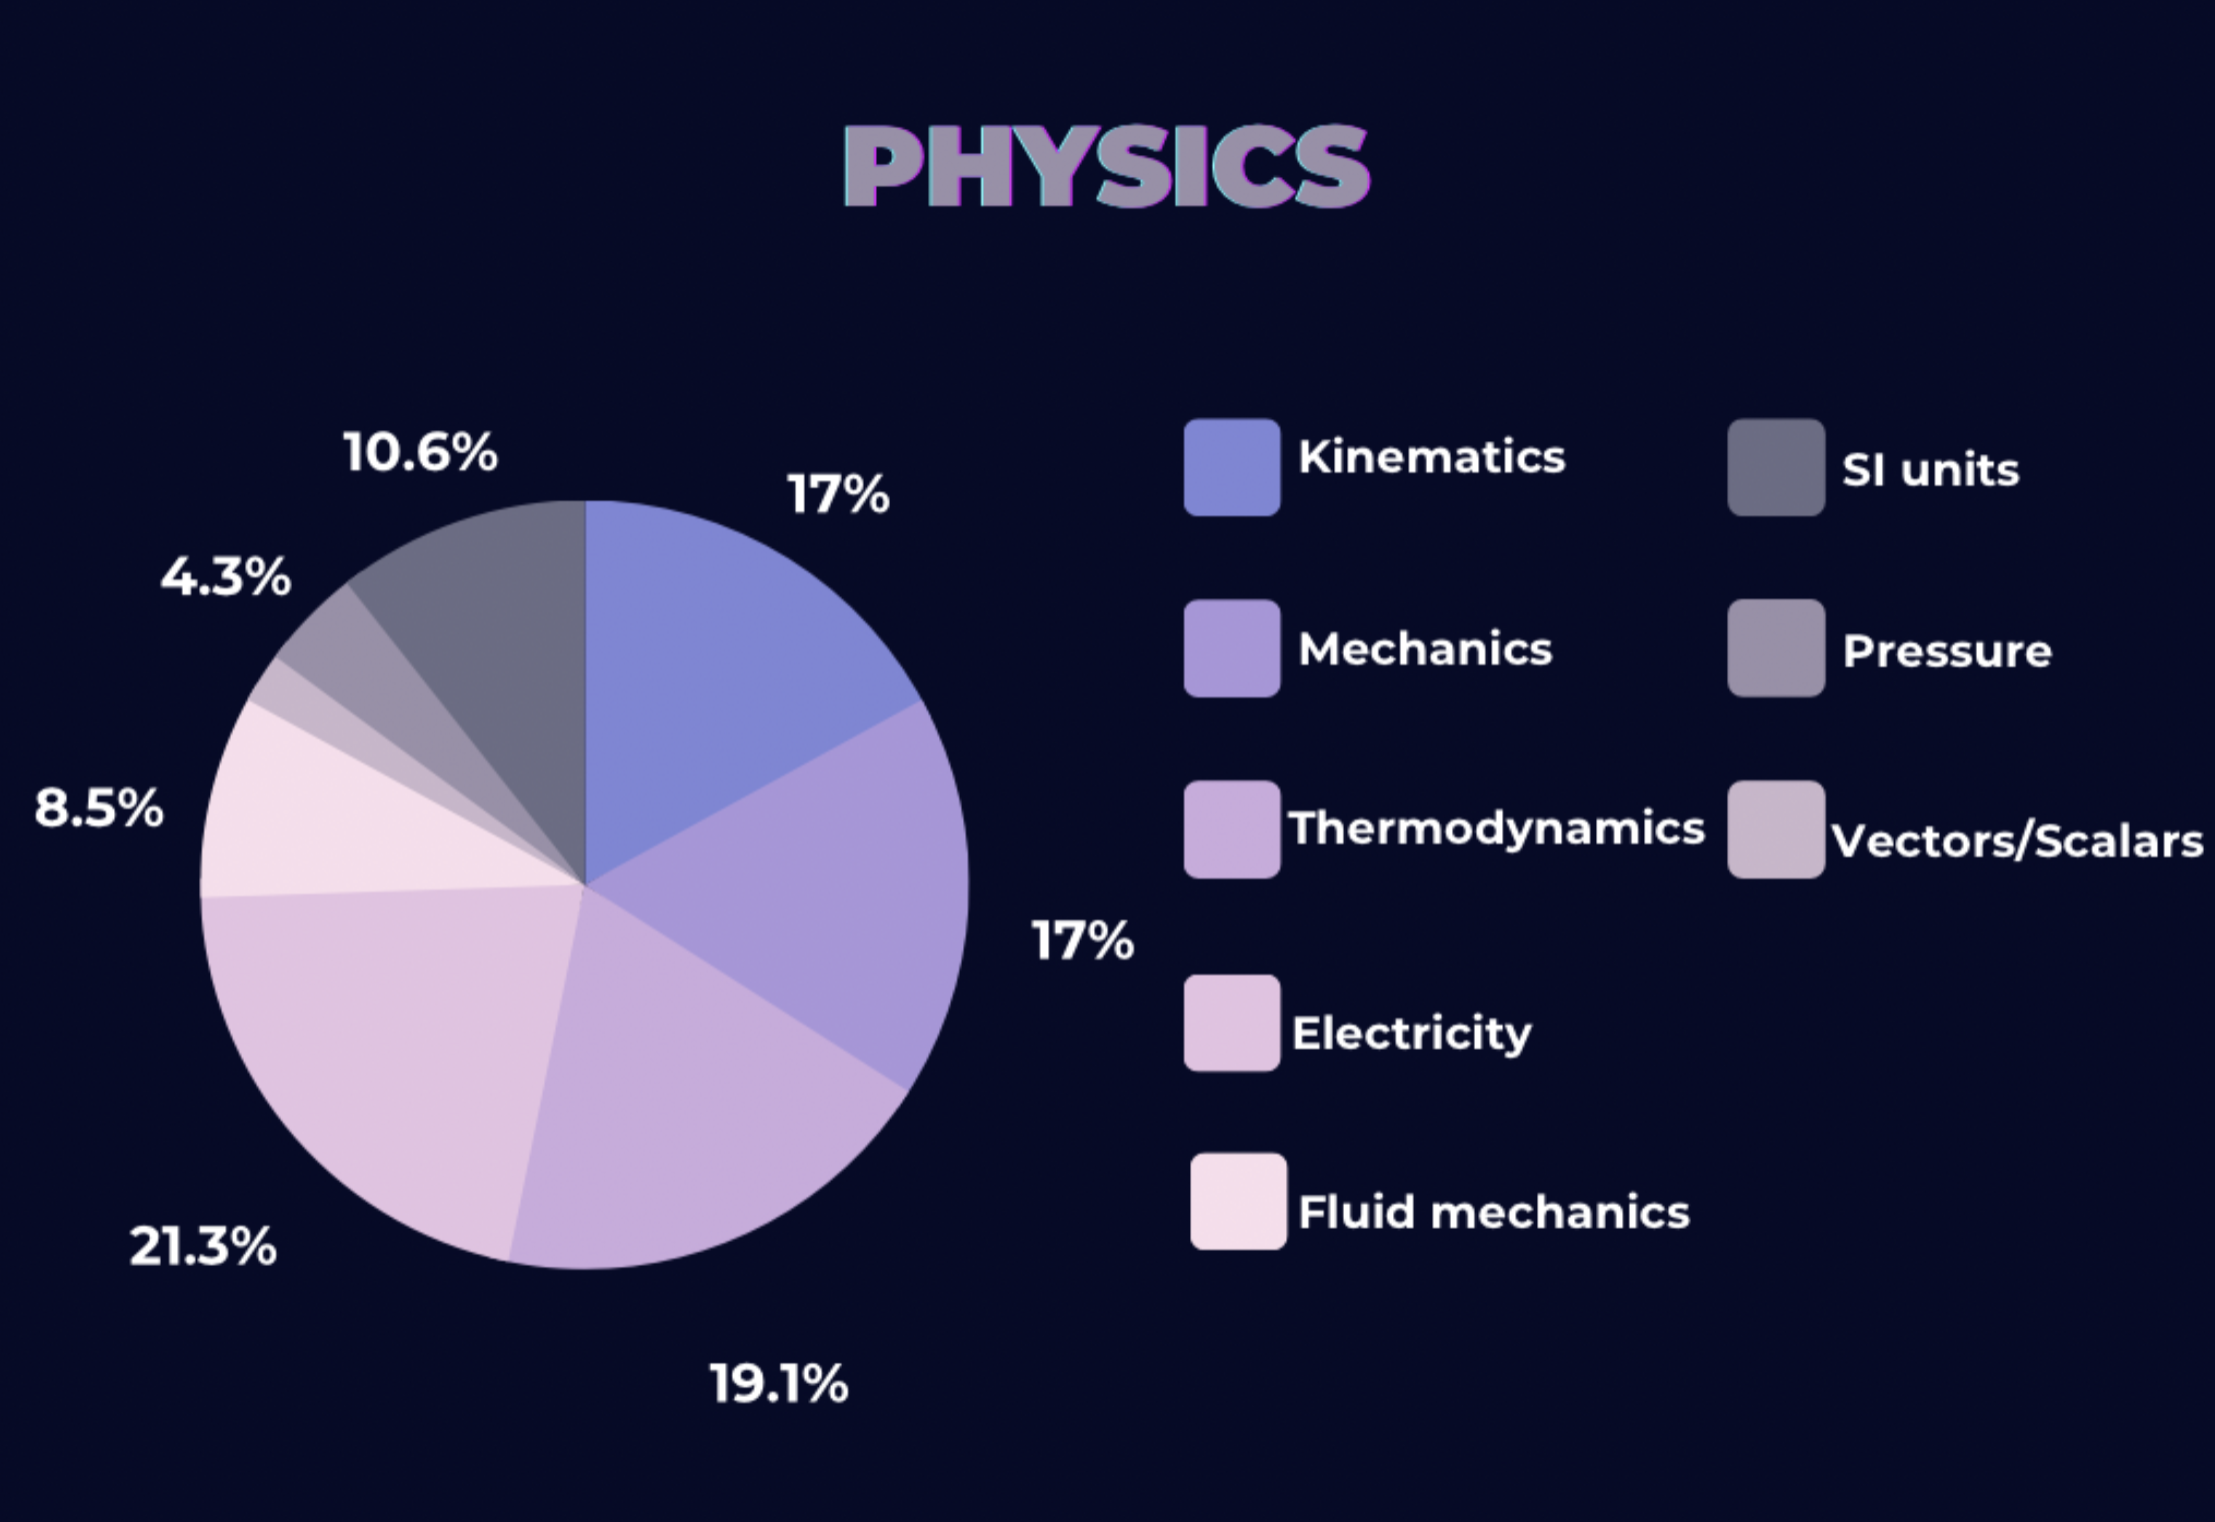 IMAT Physics section breakdown from 2011 to 2022